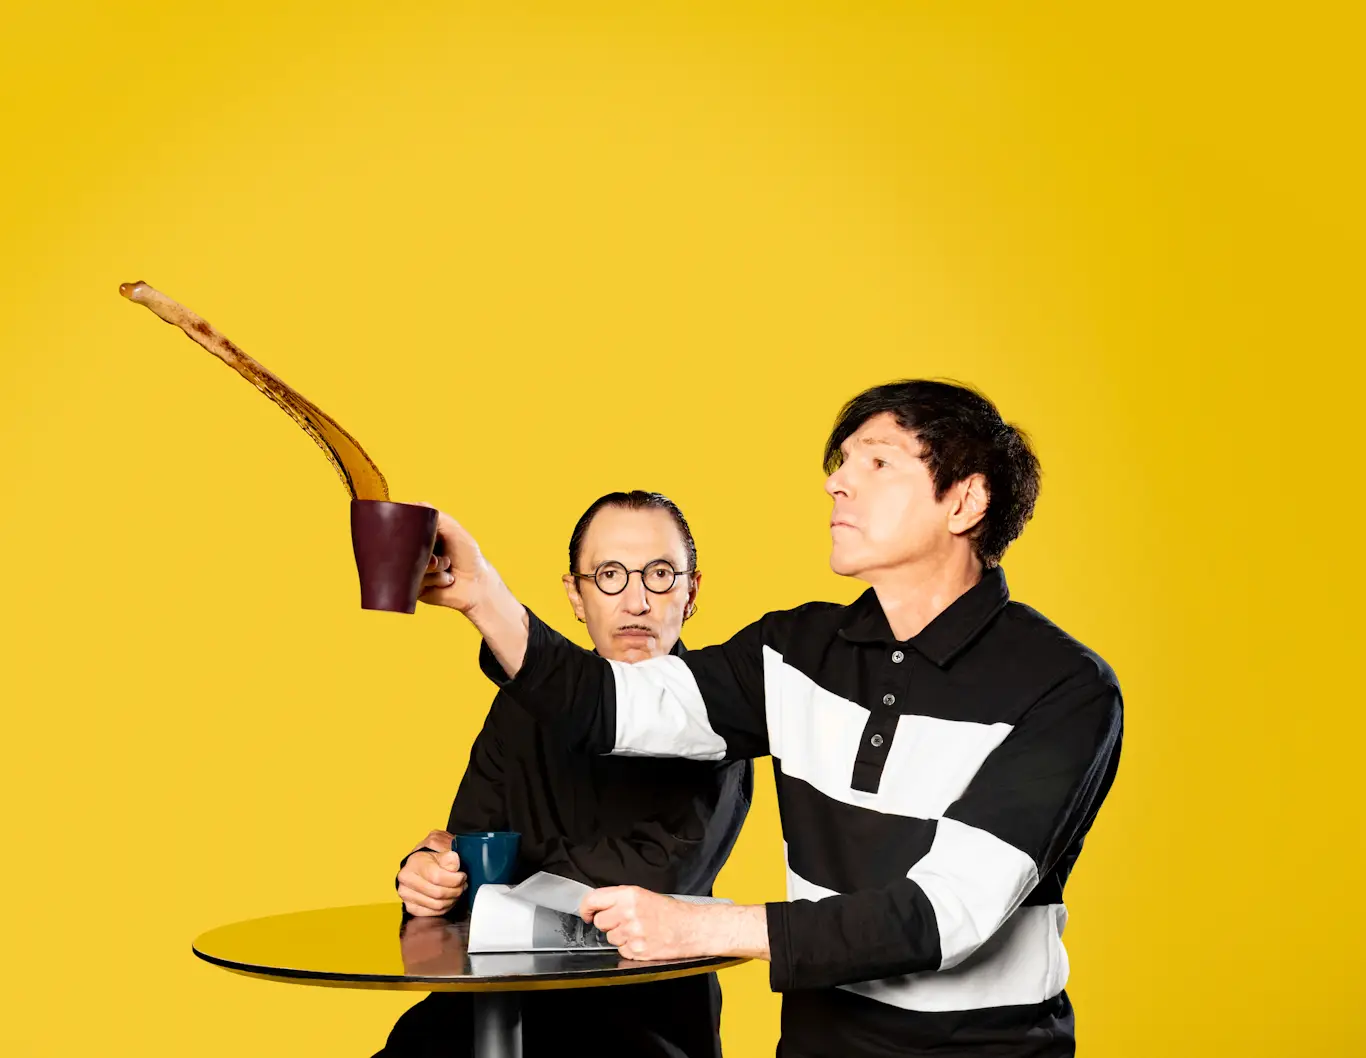 SPARKS share new track ‘Veronica Lake’ from upcoming album ‘The Girl Is Crying In Her Latte’